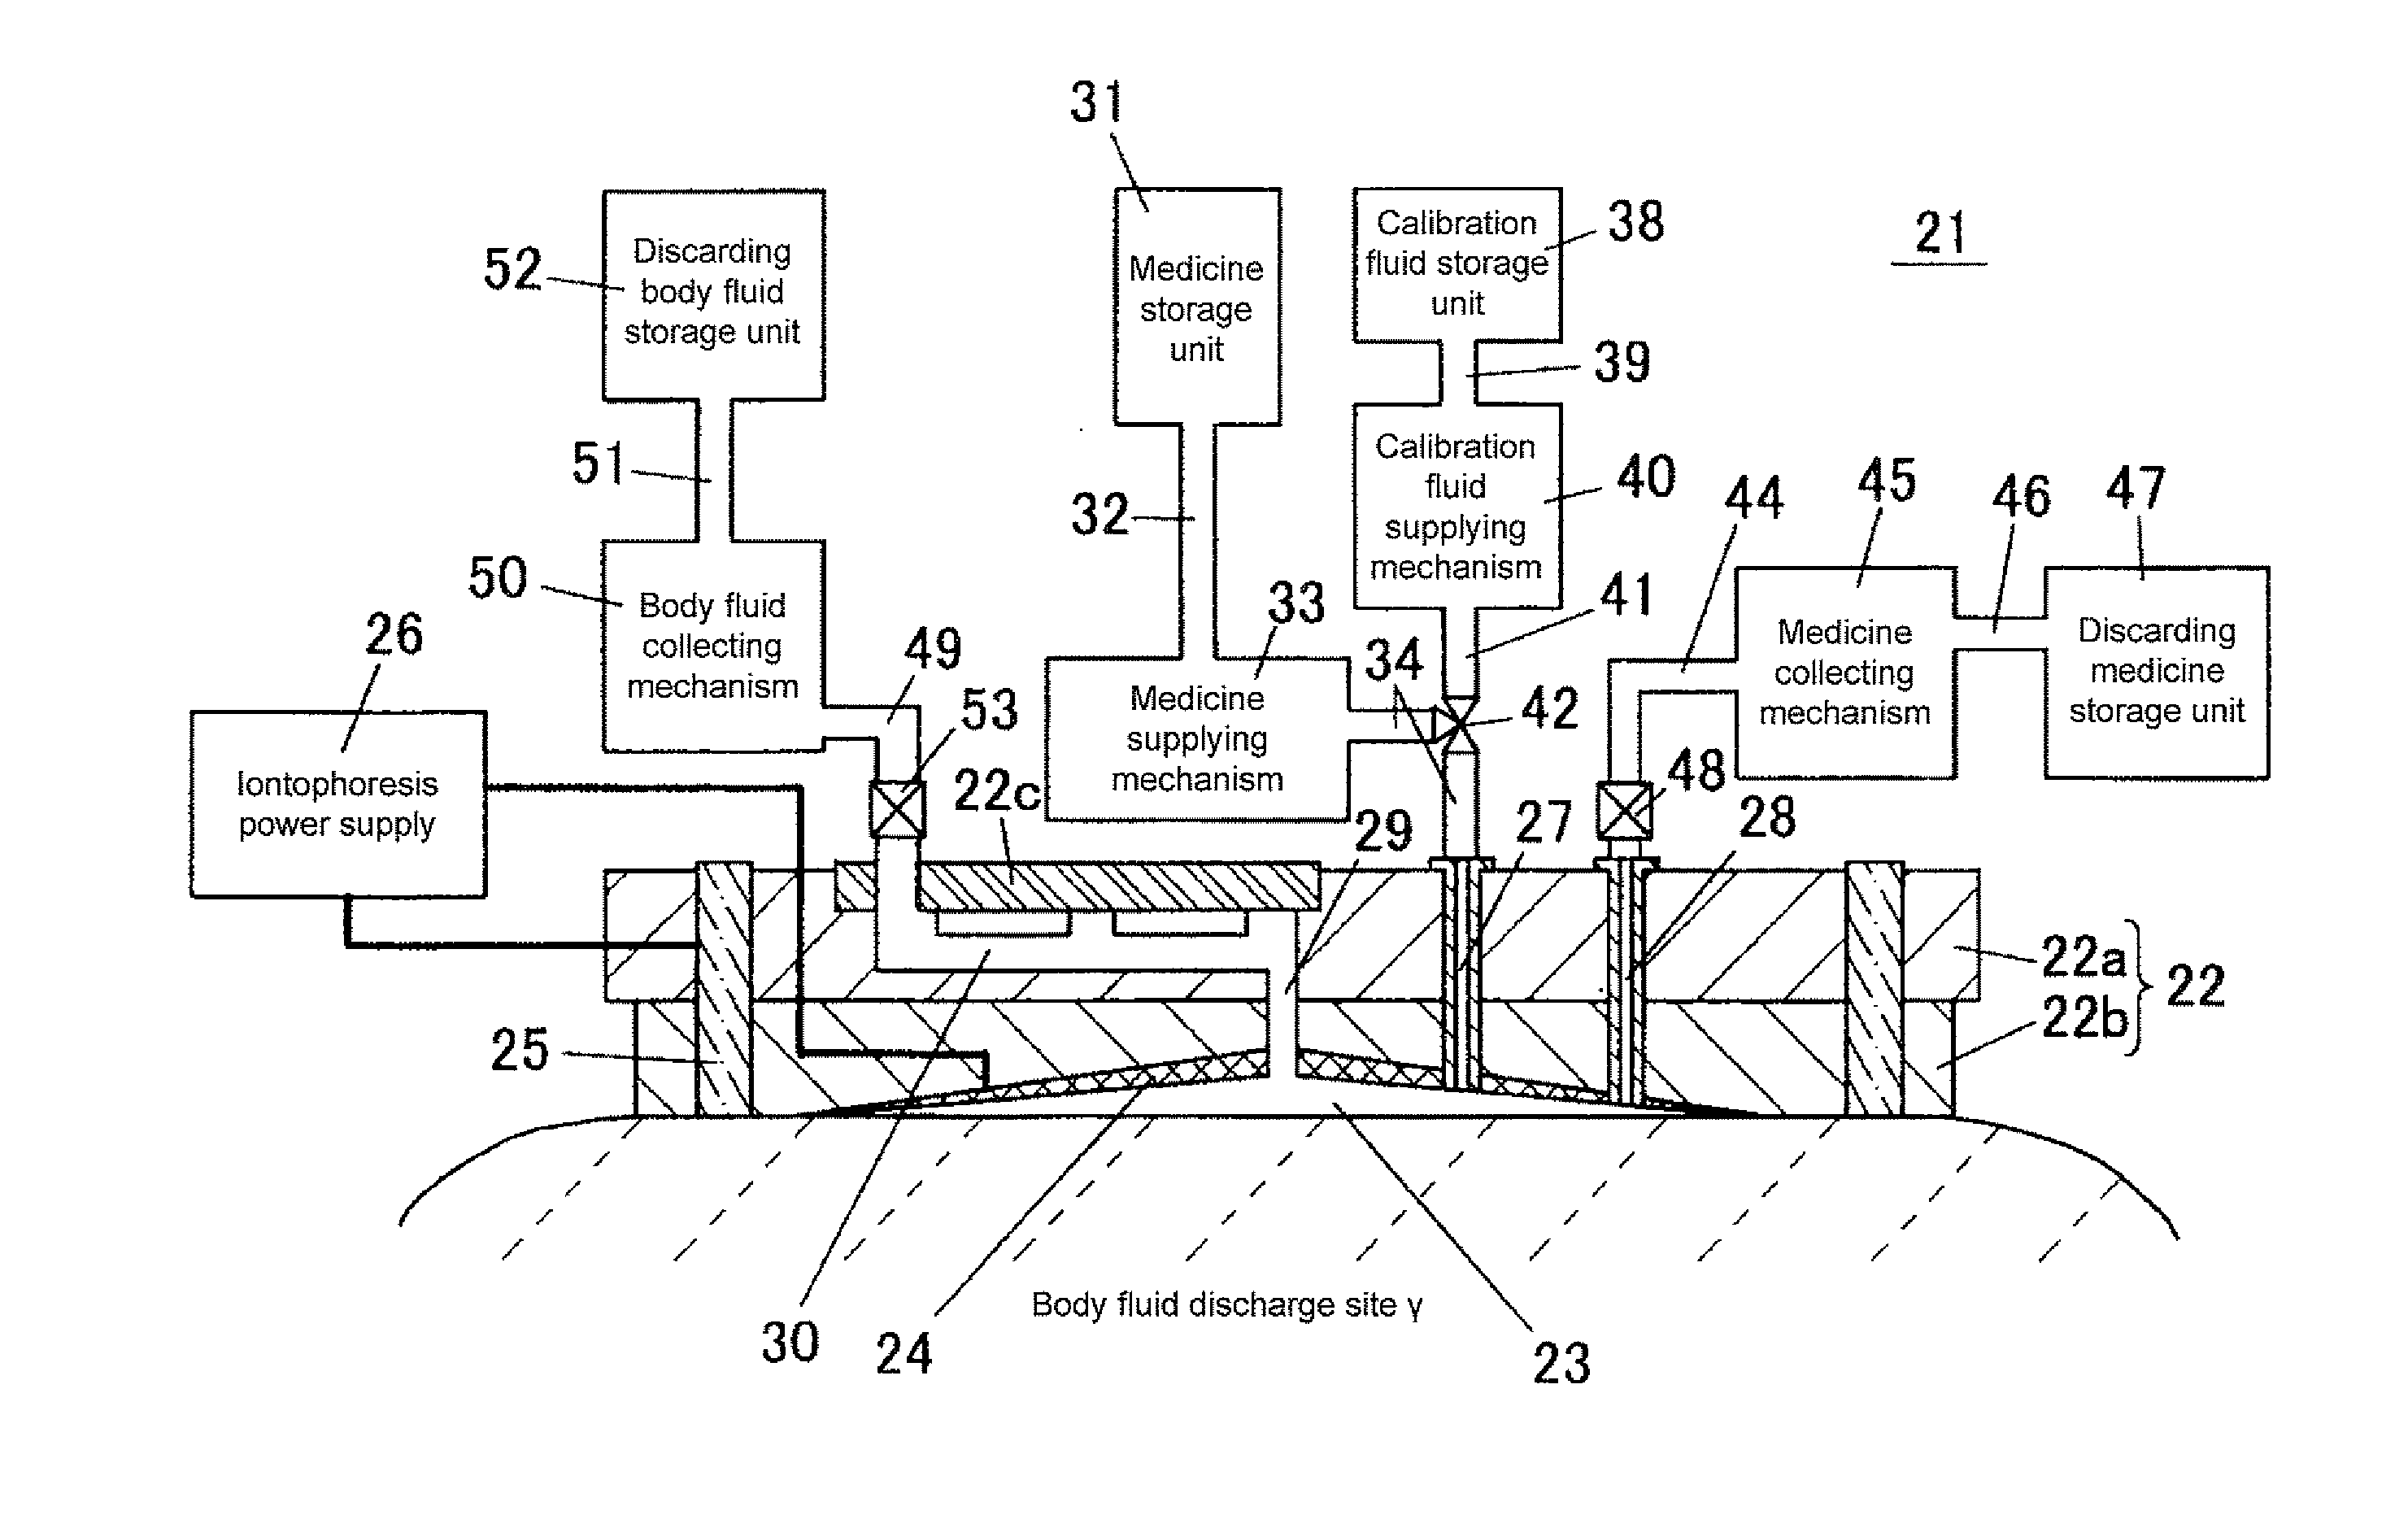 Body fluid collecting device for efficiently collecting body fluid and body fluid analyzer for accurate analysis